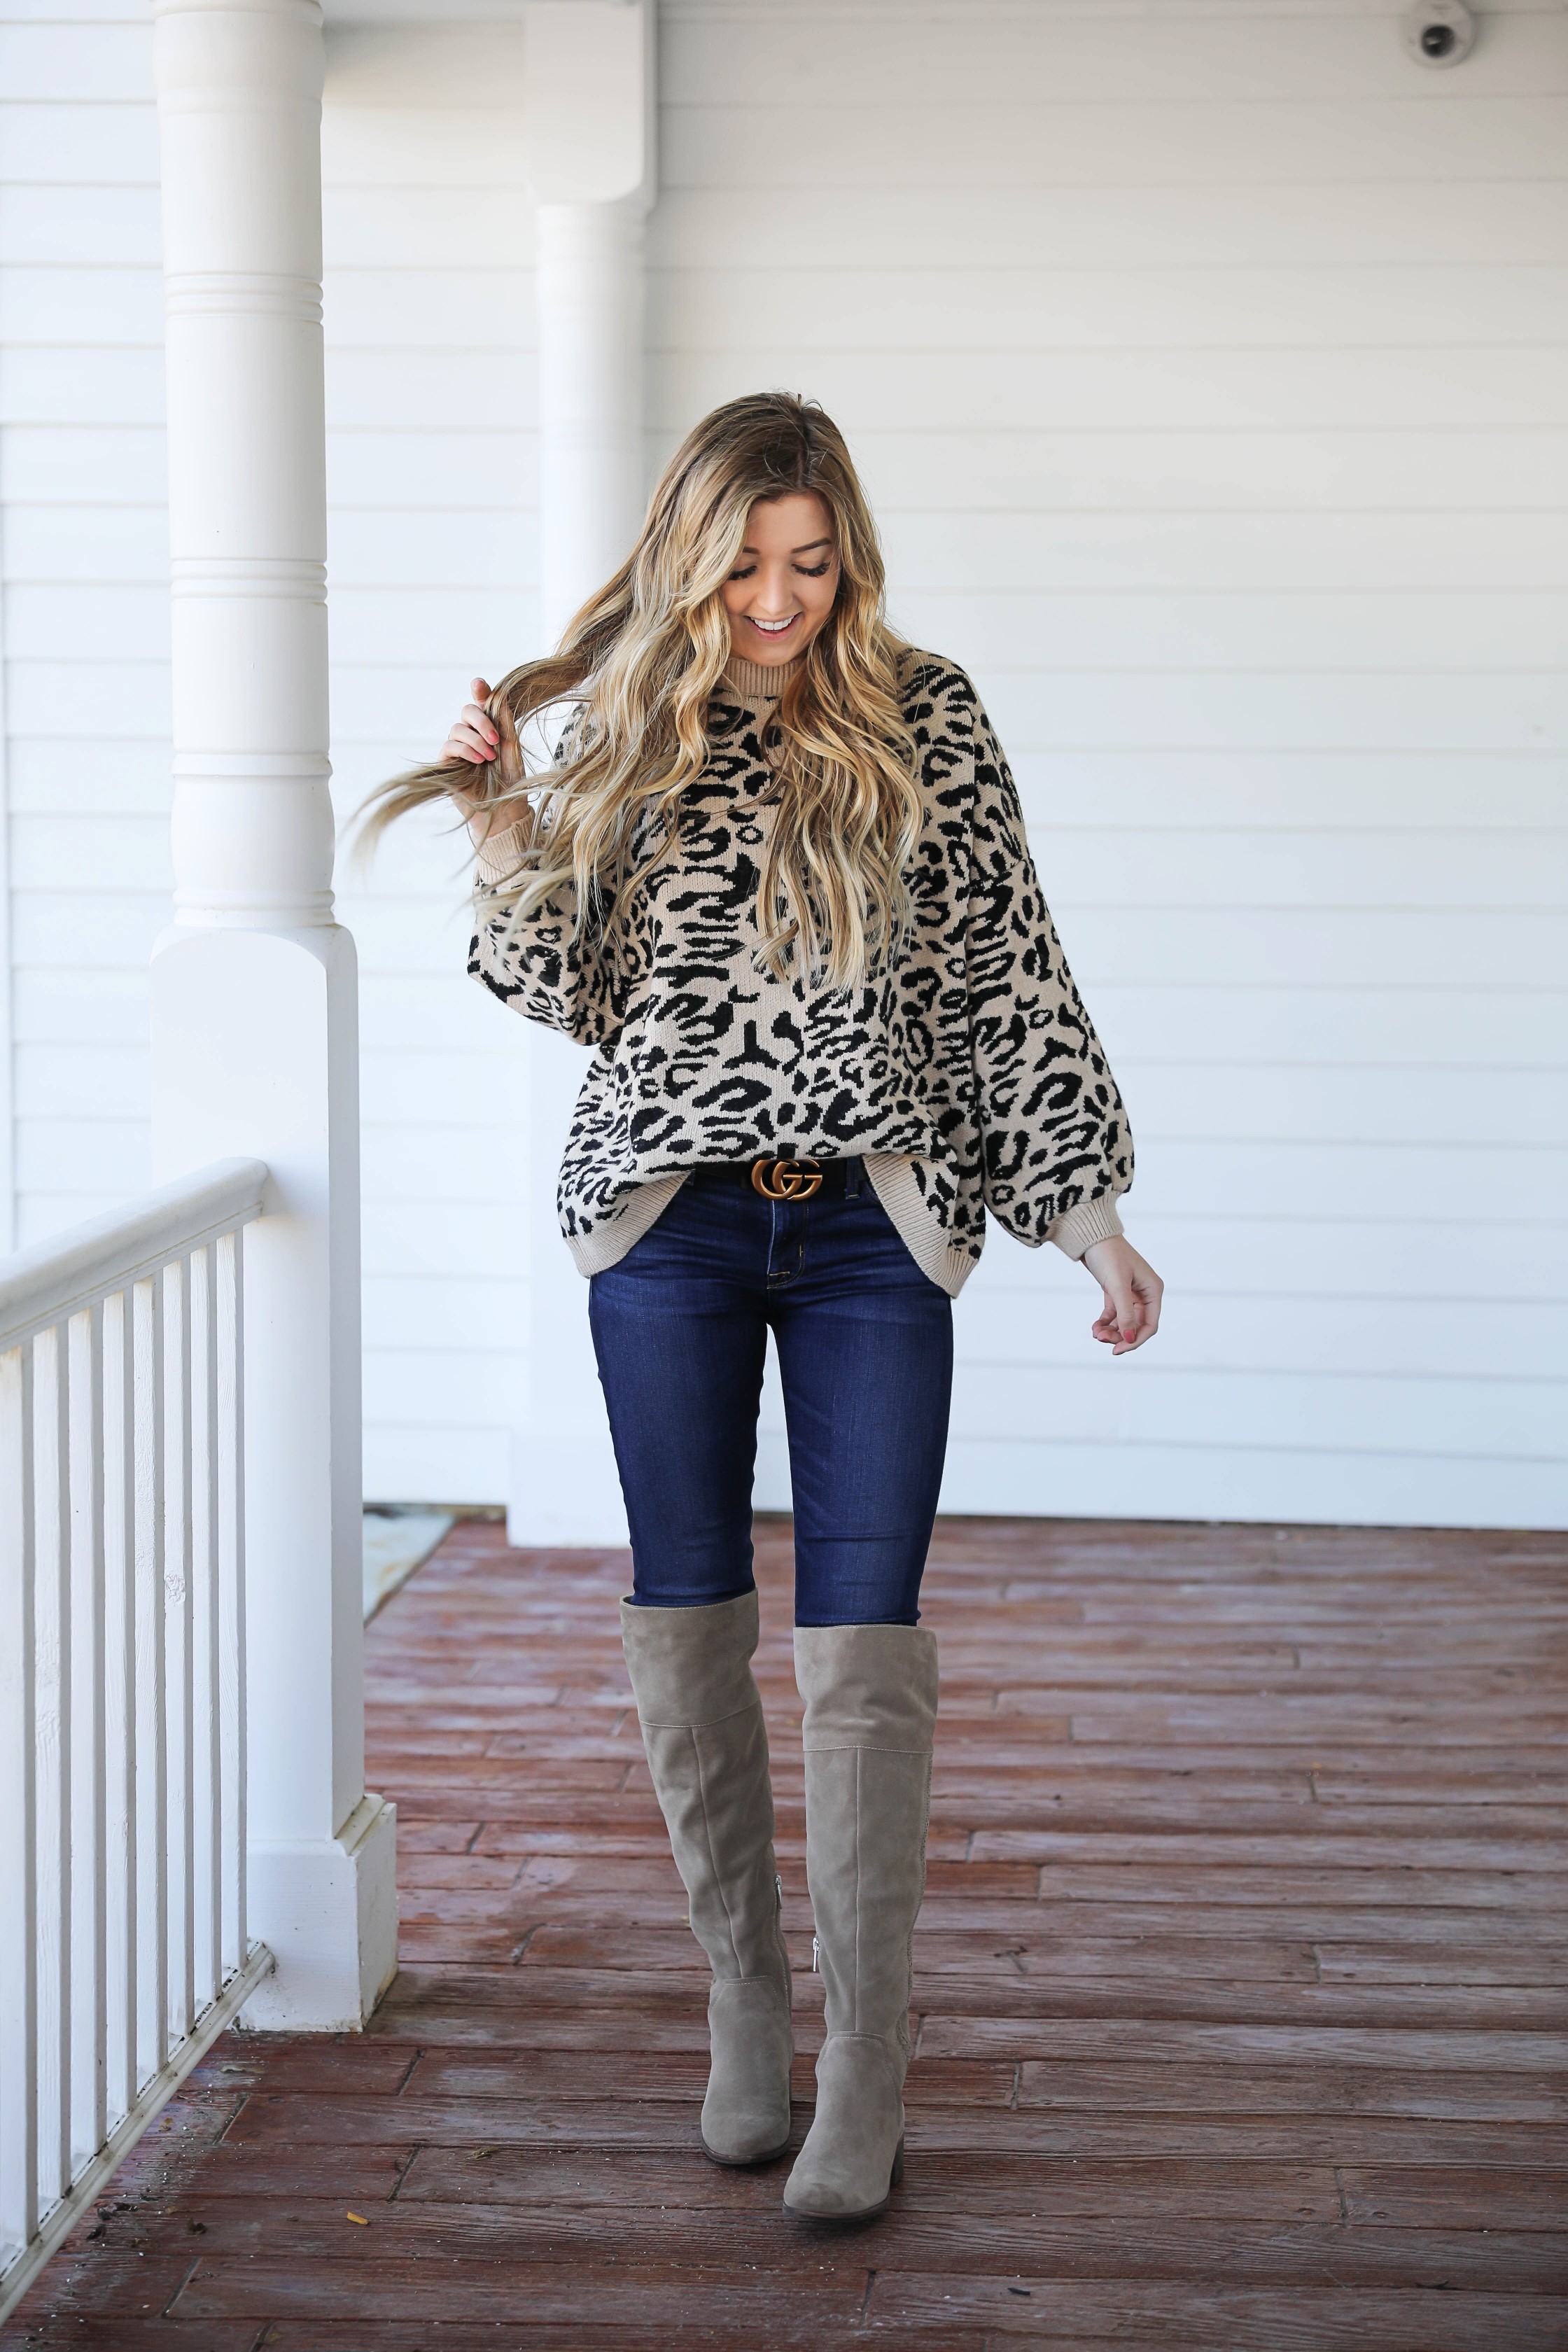 Leopard sweater for fall! Paired with my favorite $30 Gucci belt and Vince Camuto over the knee boots! Such a cute fall outfit idea! Details on fashion blog daily dose of charm by Lauren Lindmark